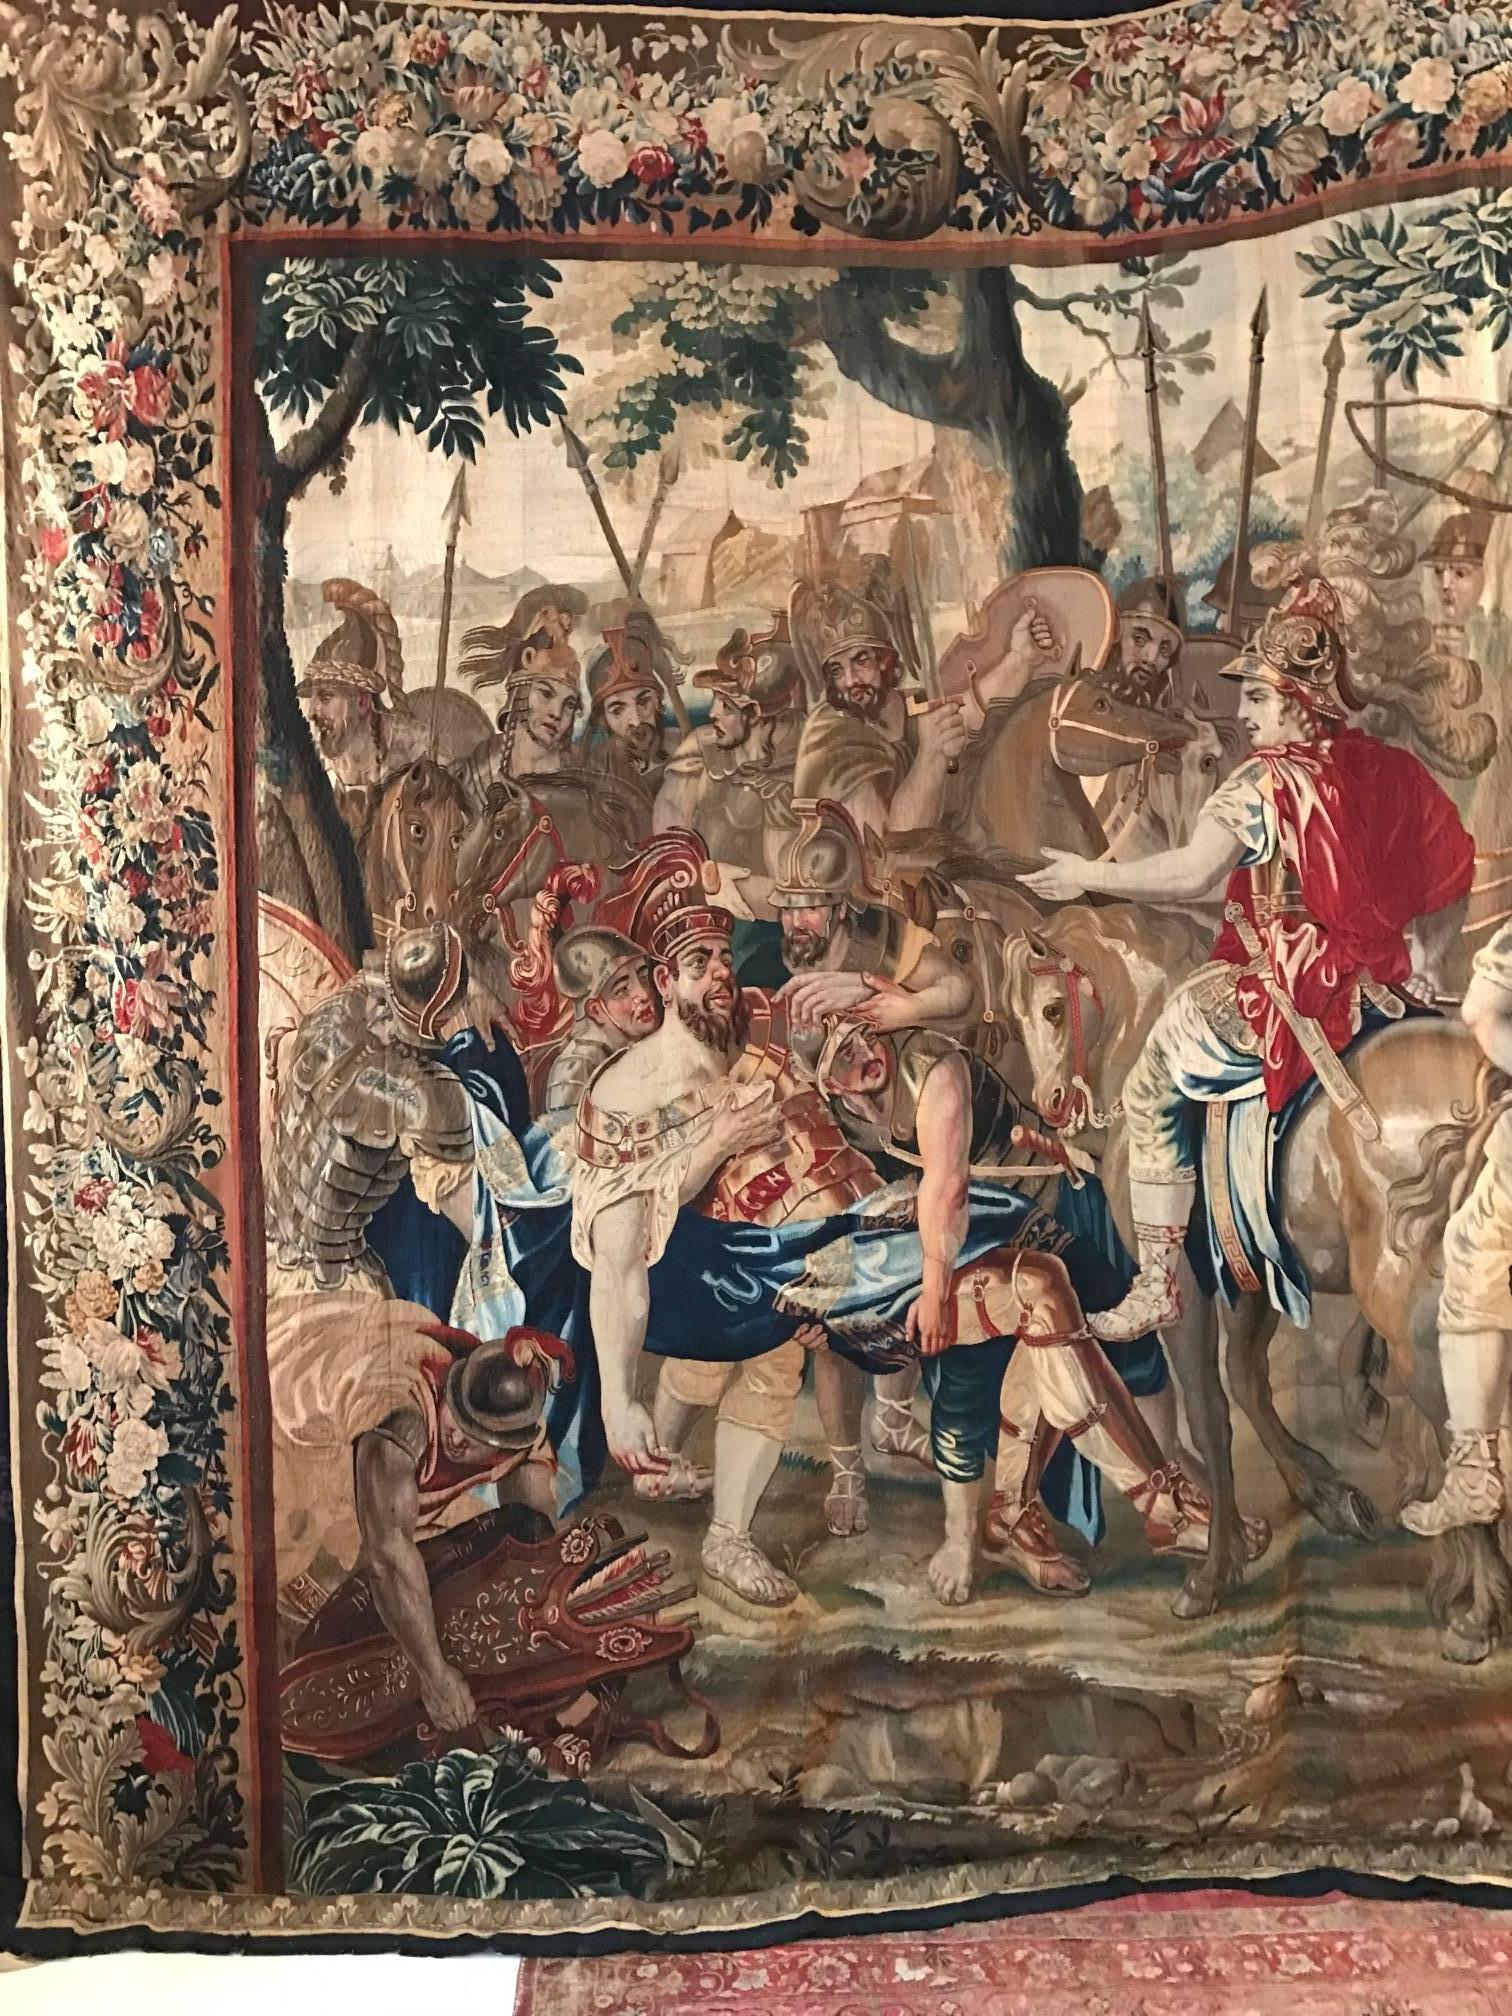 Magnificent and unique tapestry made in Brussels in wool and silk with a quite fine weave by Jan Frans Van den Hecke (1629-1675), depicting a serie of Alexander the Great's history.

The provenance is the Benavides Family collection (Cristobal